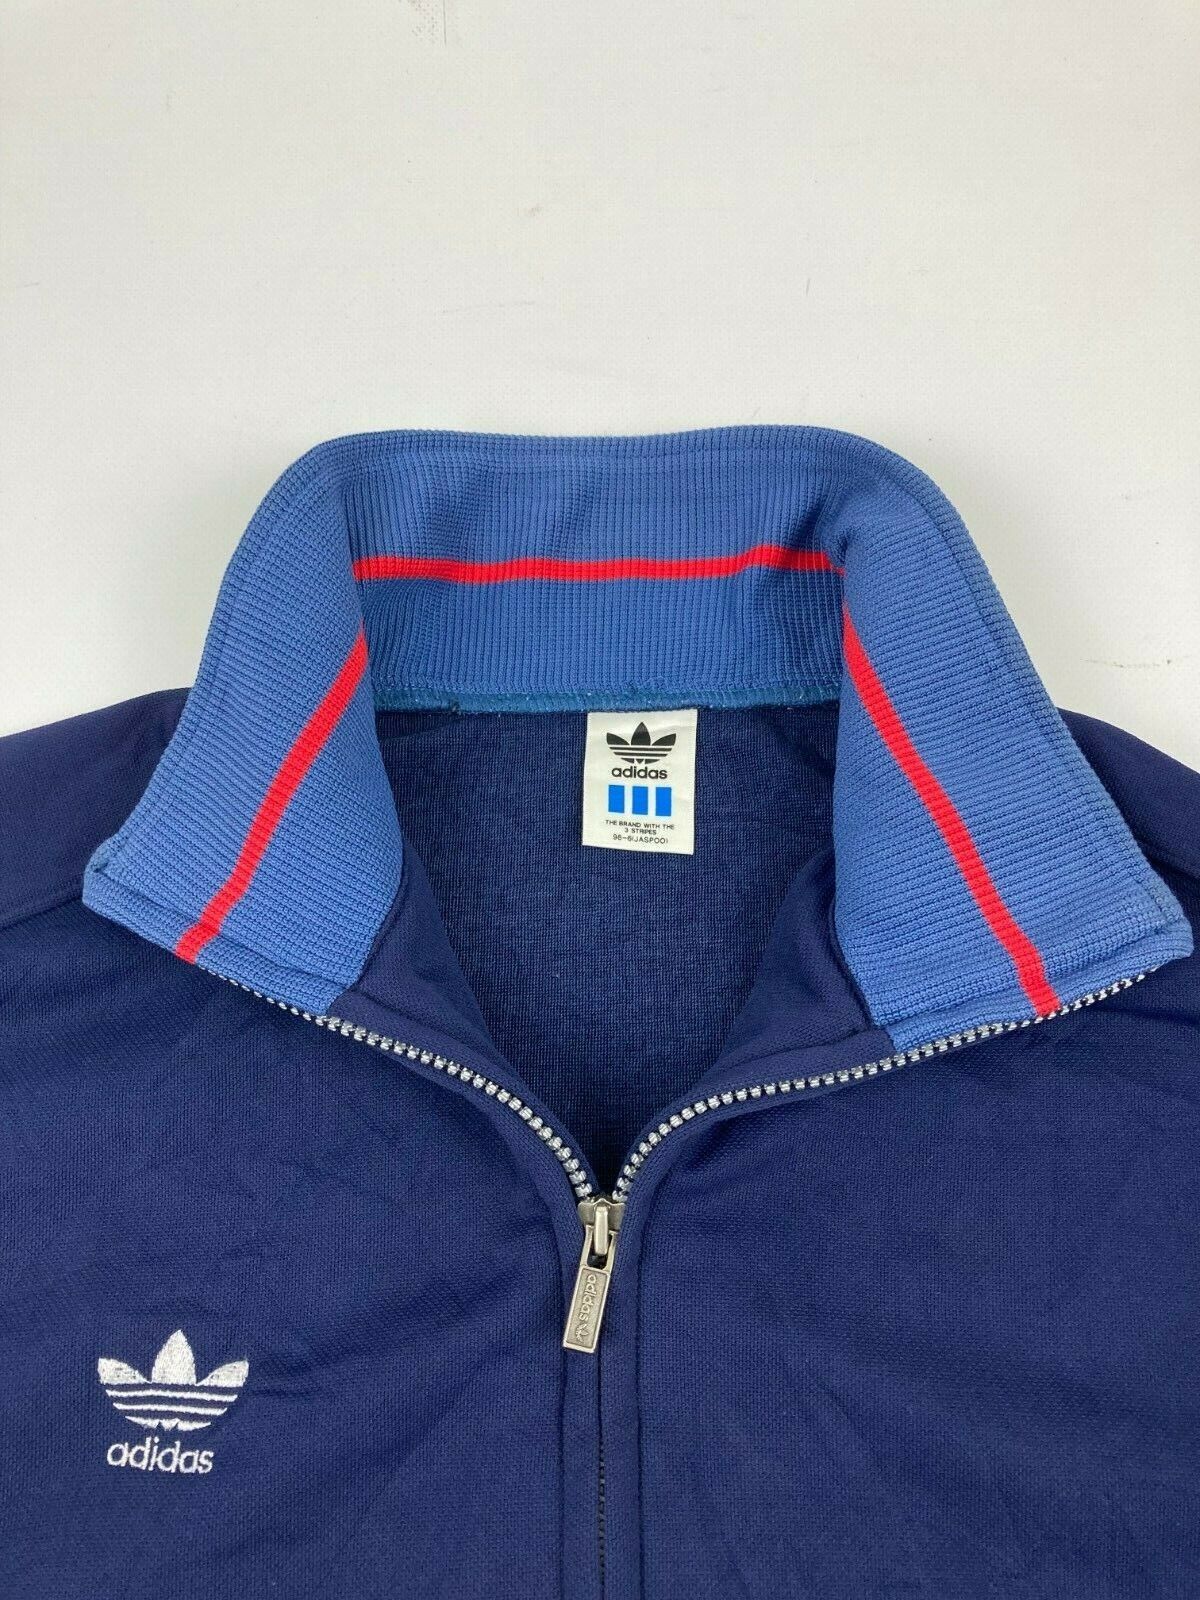 Vintage 80s Adidas by Descente Track Top Japan Made